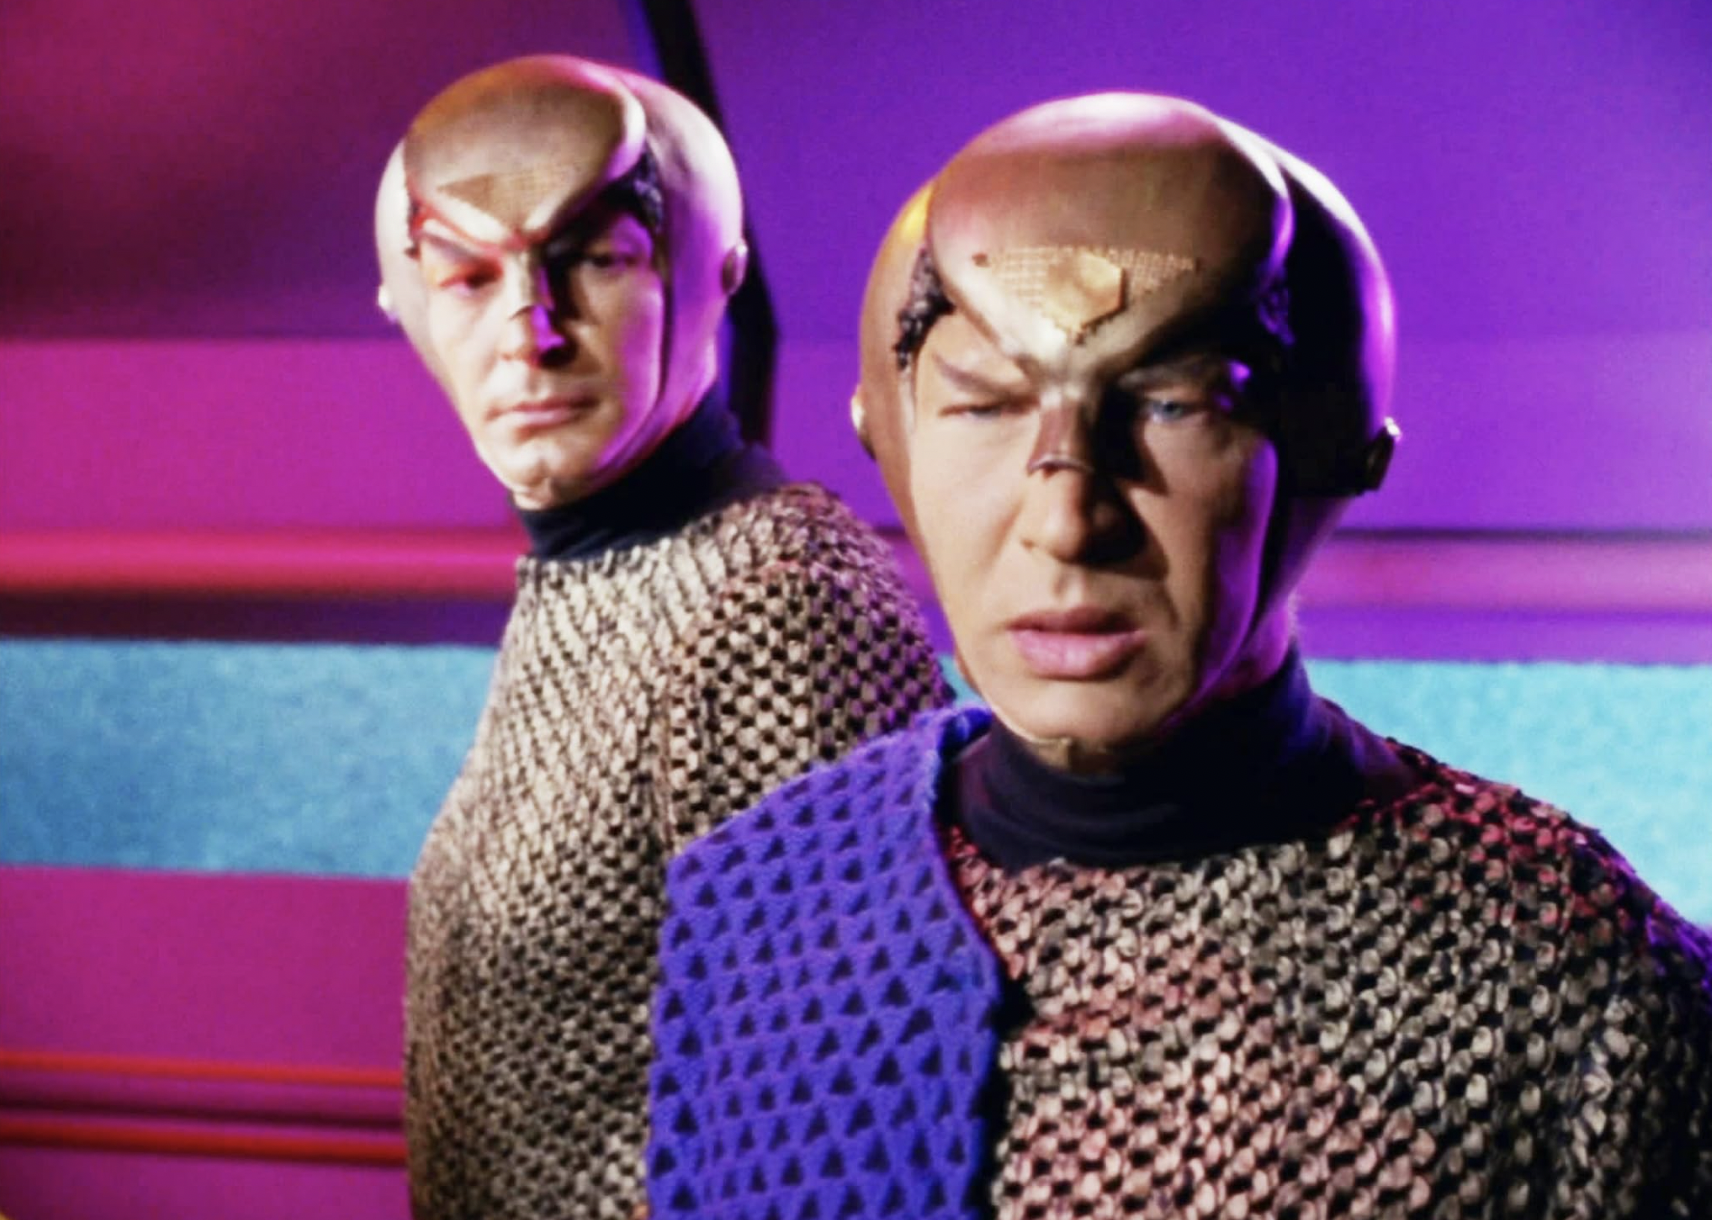 <p>- IMDb user rating: 8.8<br> - Season 1, Episode 14<br> - Director: Vincent McEveety</p>  <p>Episode 14 of the first season of "Star Trek" is essential viewing, as it introduces the antagonistic Romulan race, a staple of the "Star Trek" universe. The centerpiece of this action-packed episode is a cat-and-mouse game between the Enterprise and a Romulan vessel with cloaking capabilities, leading to exciting and tense encounters. It's an episode full of high emotion that explores the effect and ramifications of war, with <a href="https://www.startrek.com/database_article/balance-of-terror">Kirk and the Romulan commander speculating</a> that in another life, perhaps they could have been friends.</p>